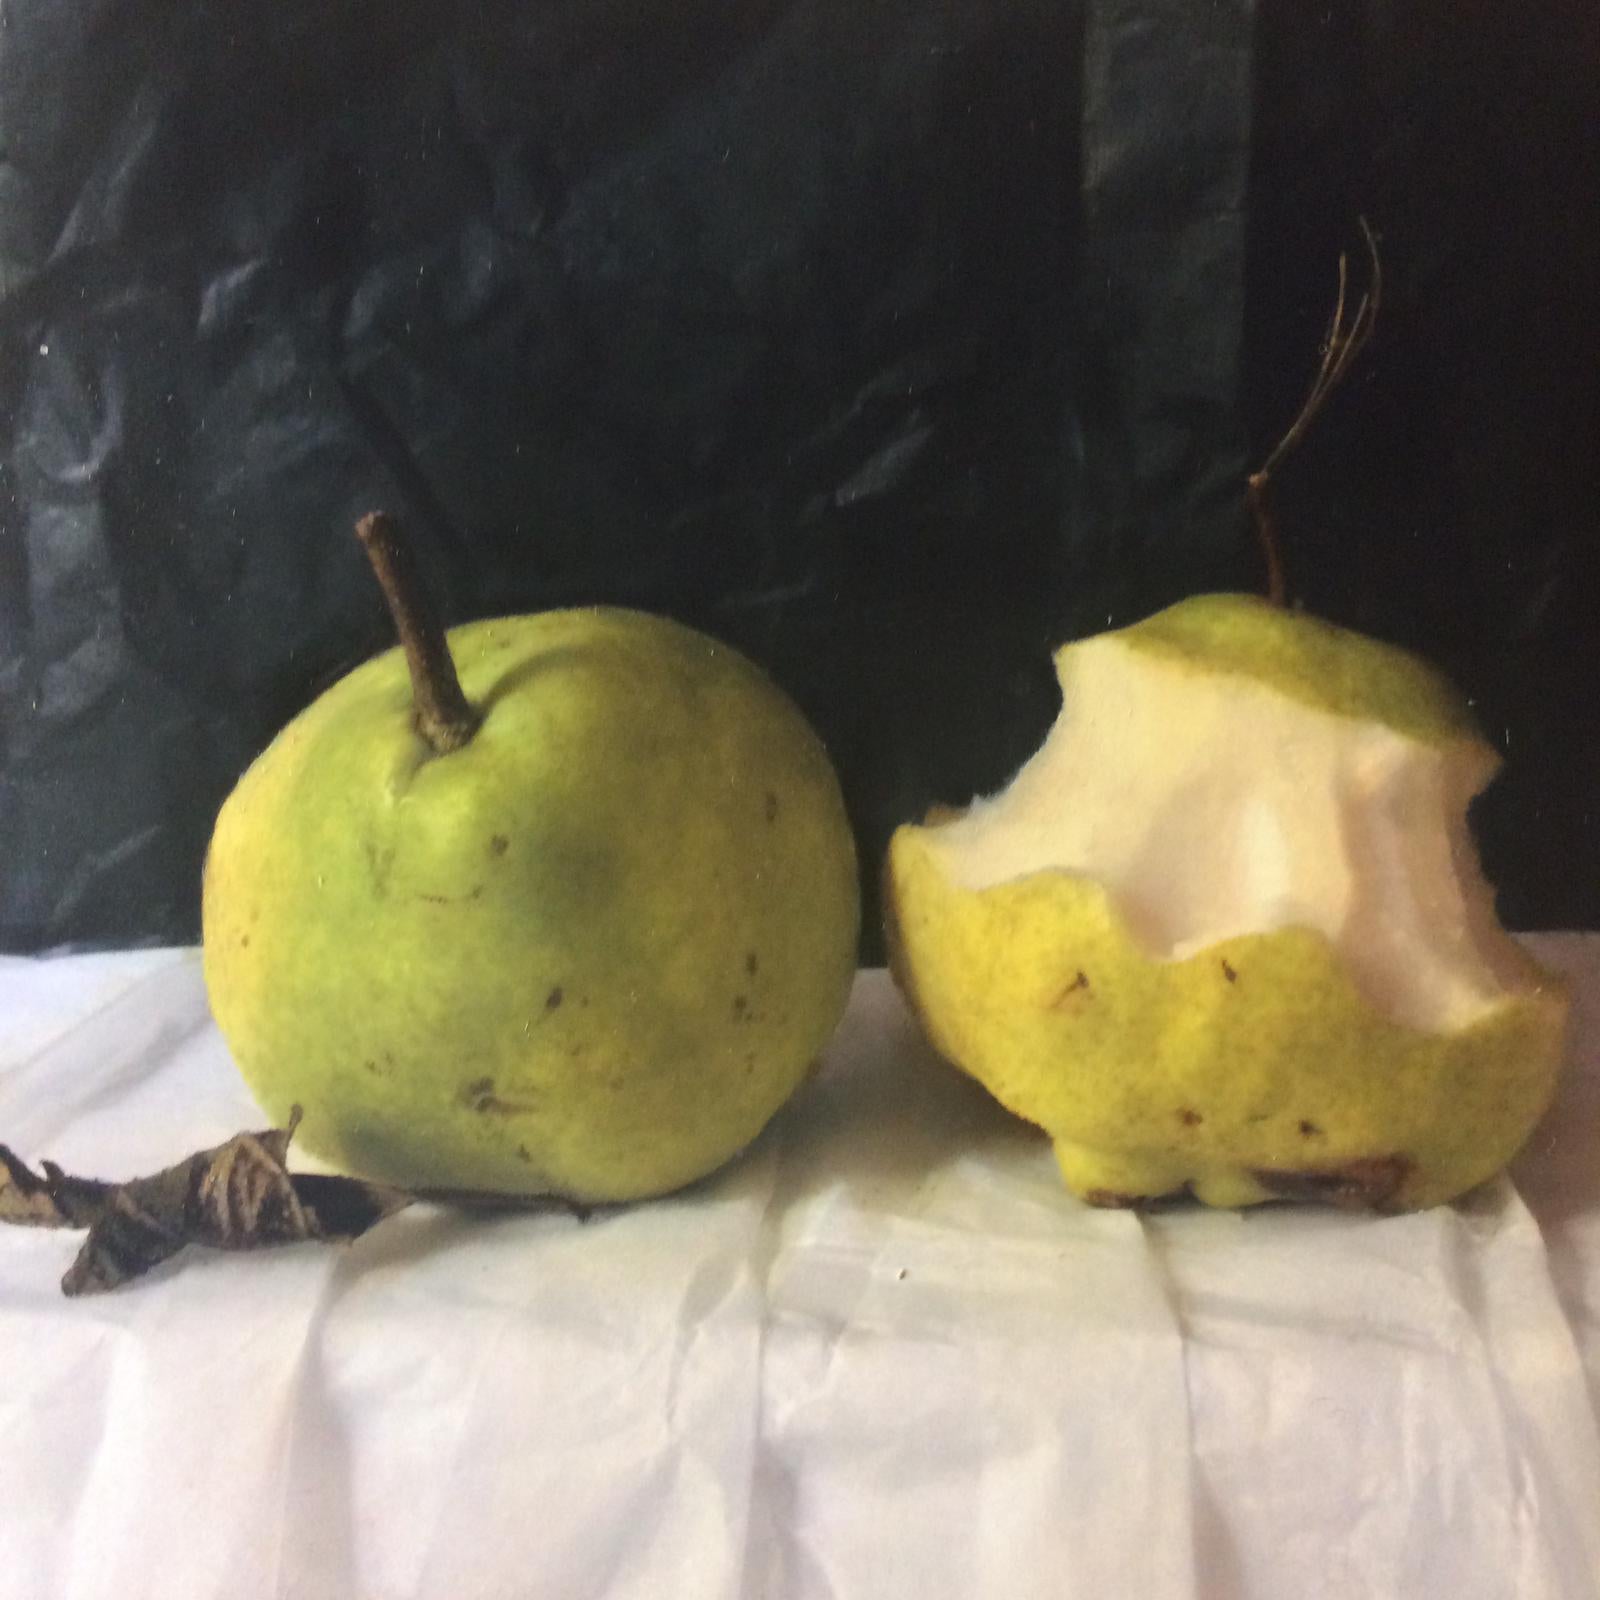 Chinese Pears